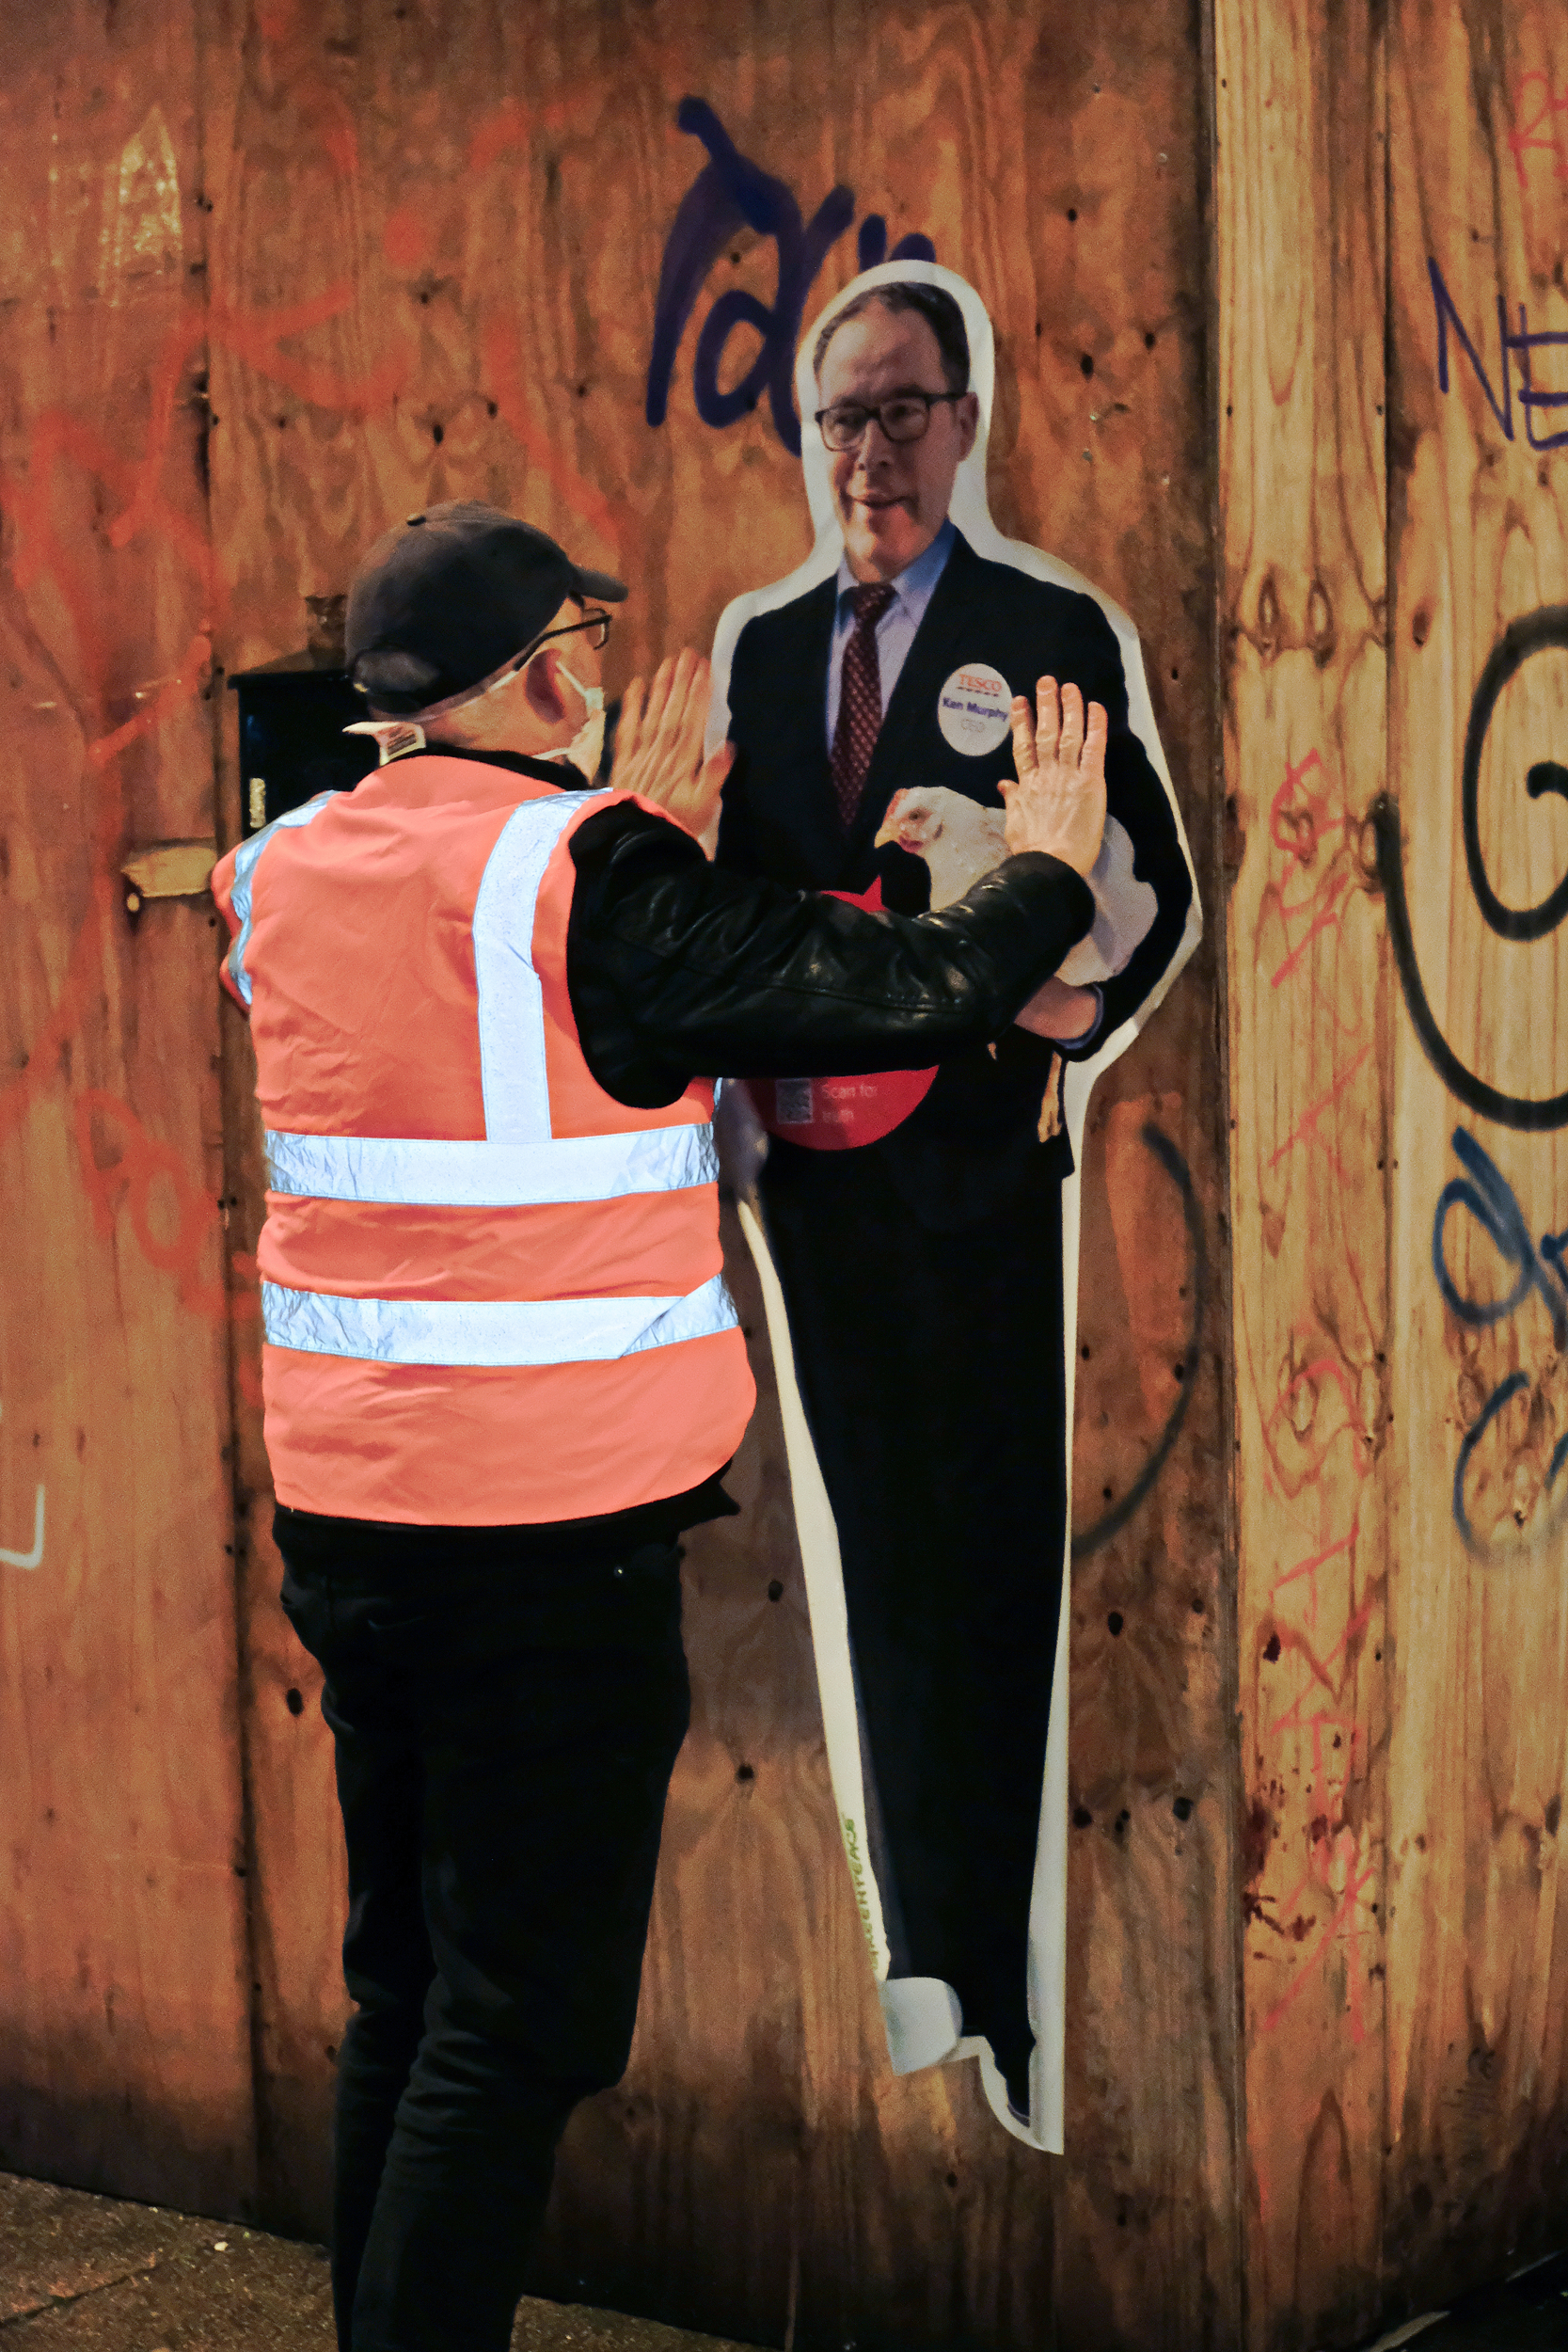 A volunteer putting up a life-size poster depicting Tesco's CEO holding a chicken onto a graffitied wall.